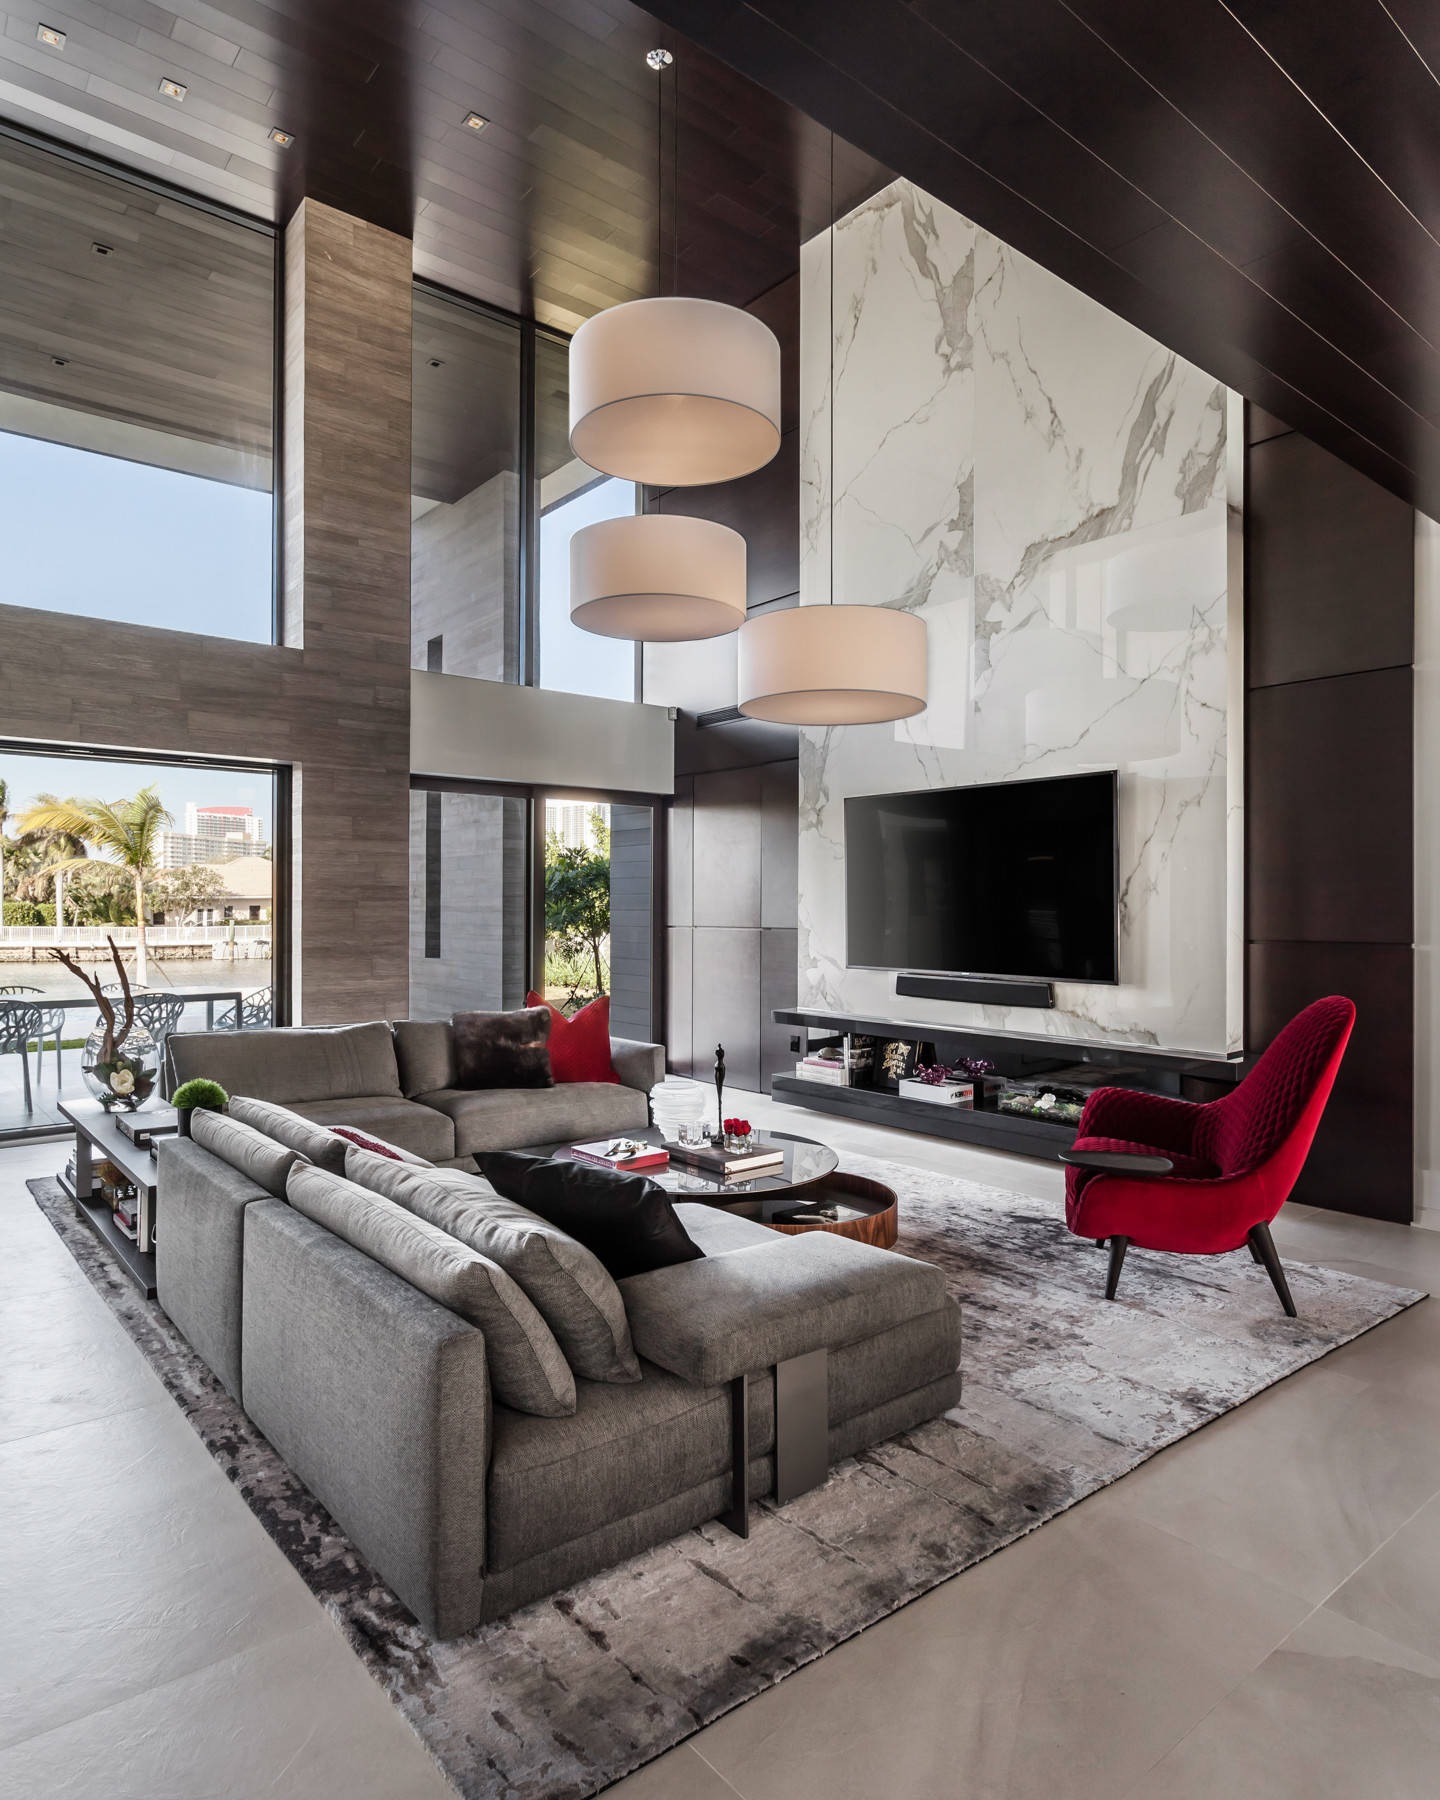 CONTEMPORARY MODERN LIVING ROOM SURROUNDED BY COMFORT